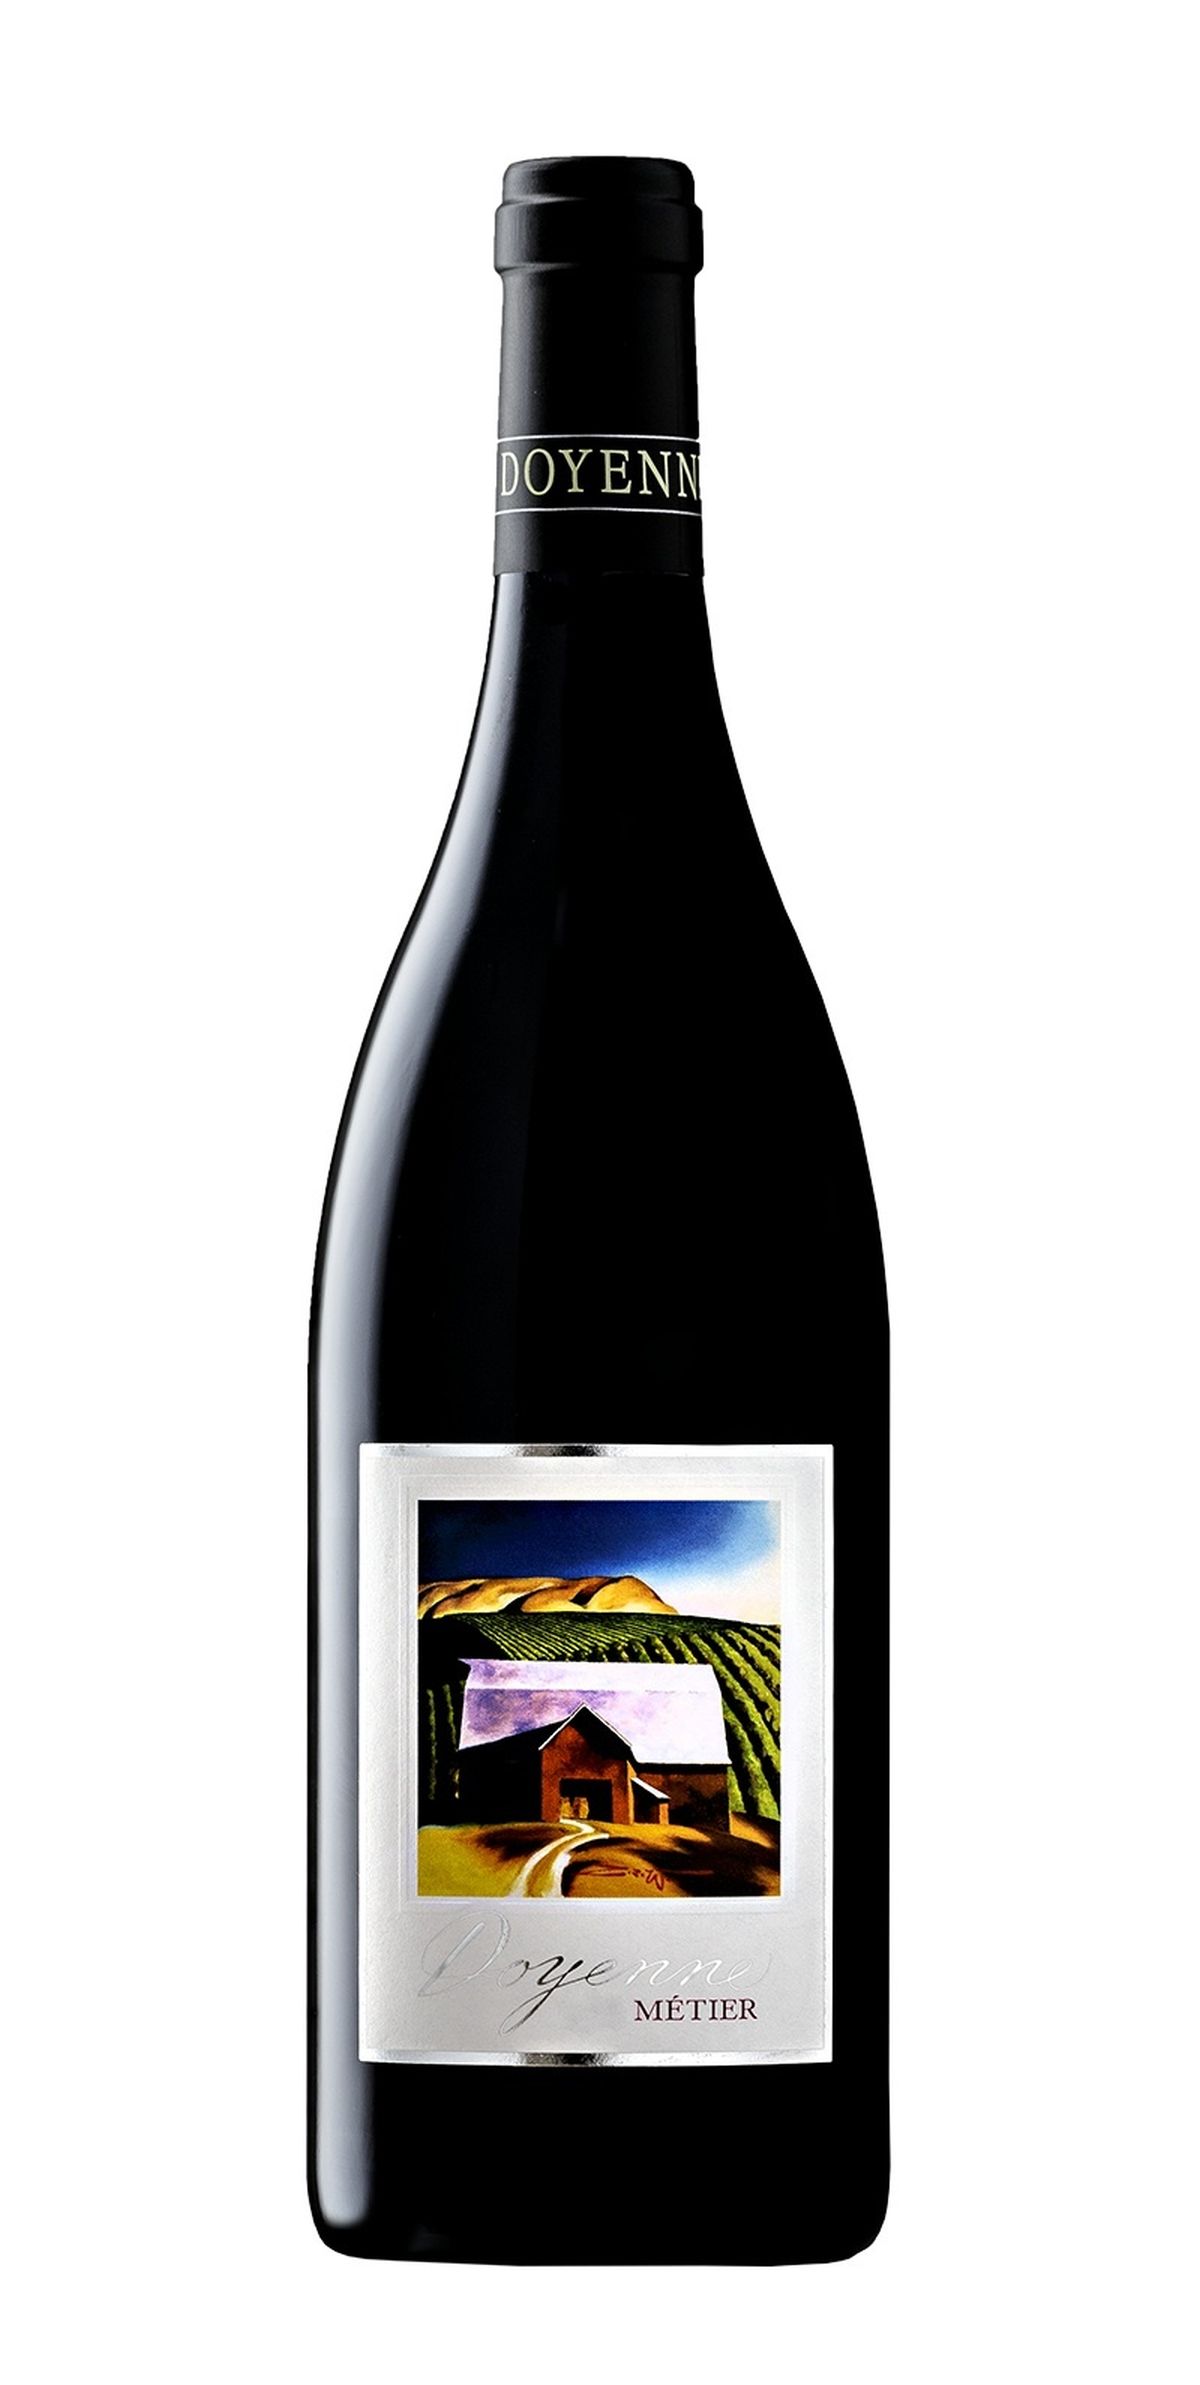 Doyenne Metier is a Rhône-style red blend made by DeLille Cellars winemaker Chris Upchurch in Woodinville, Wash.